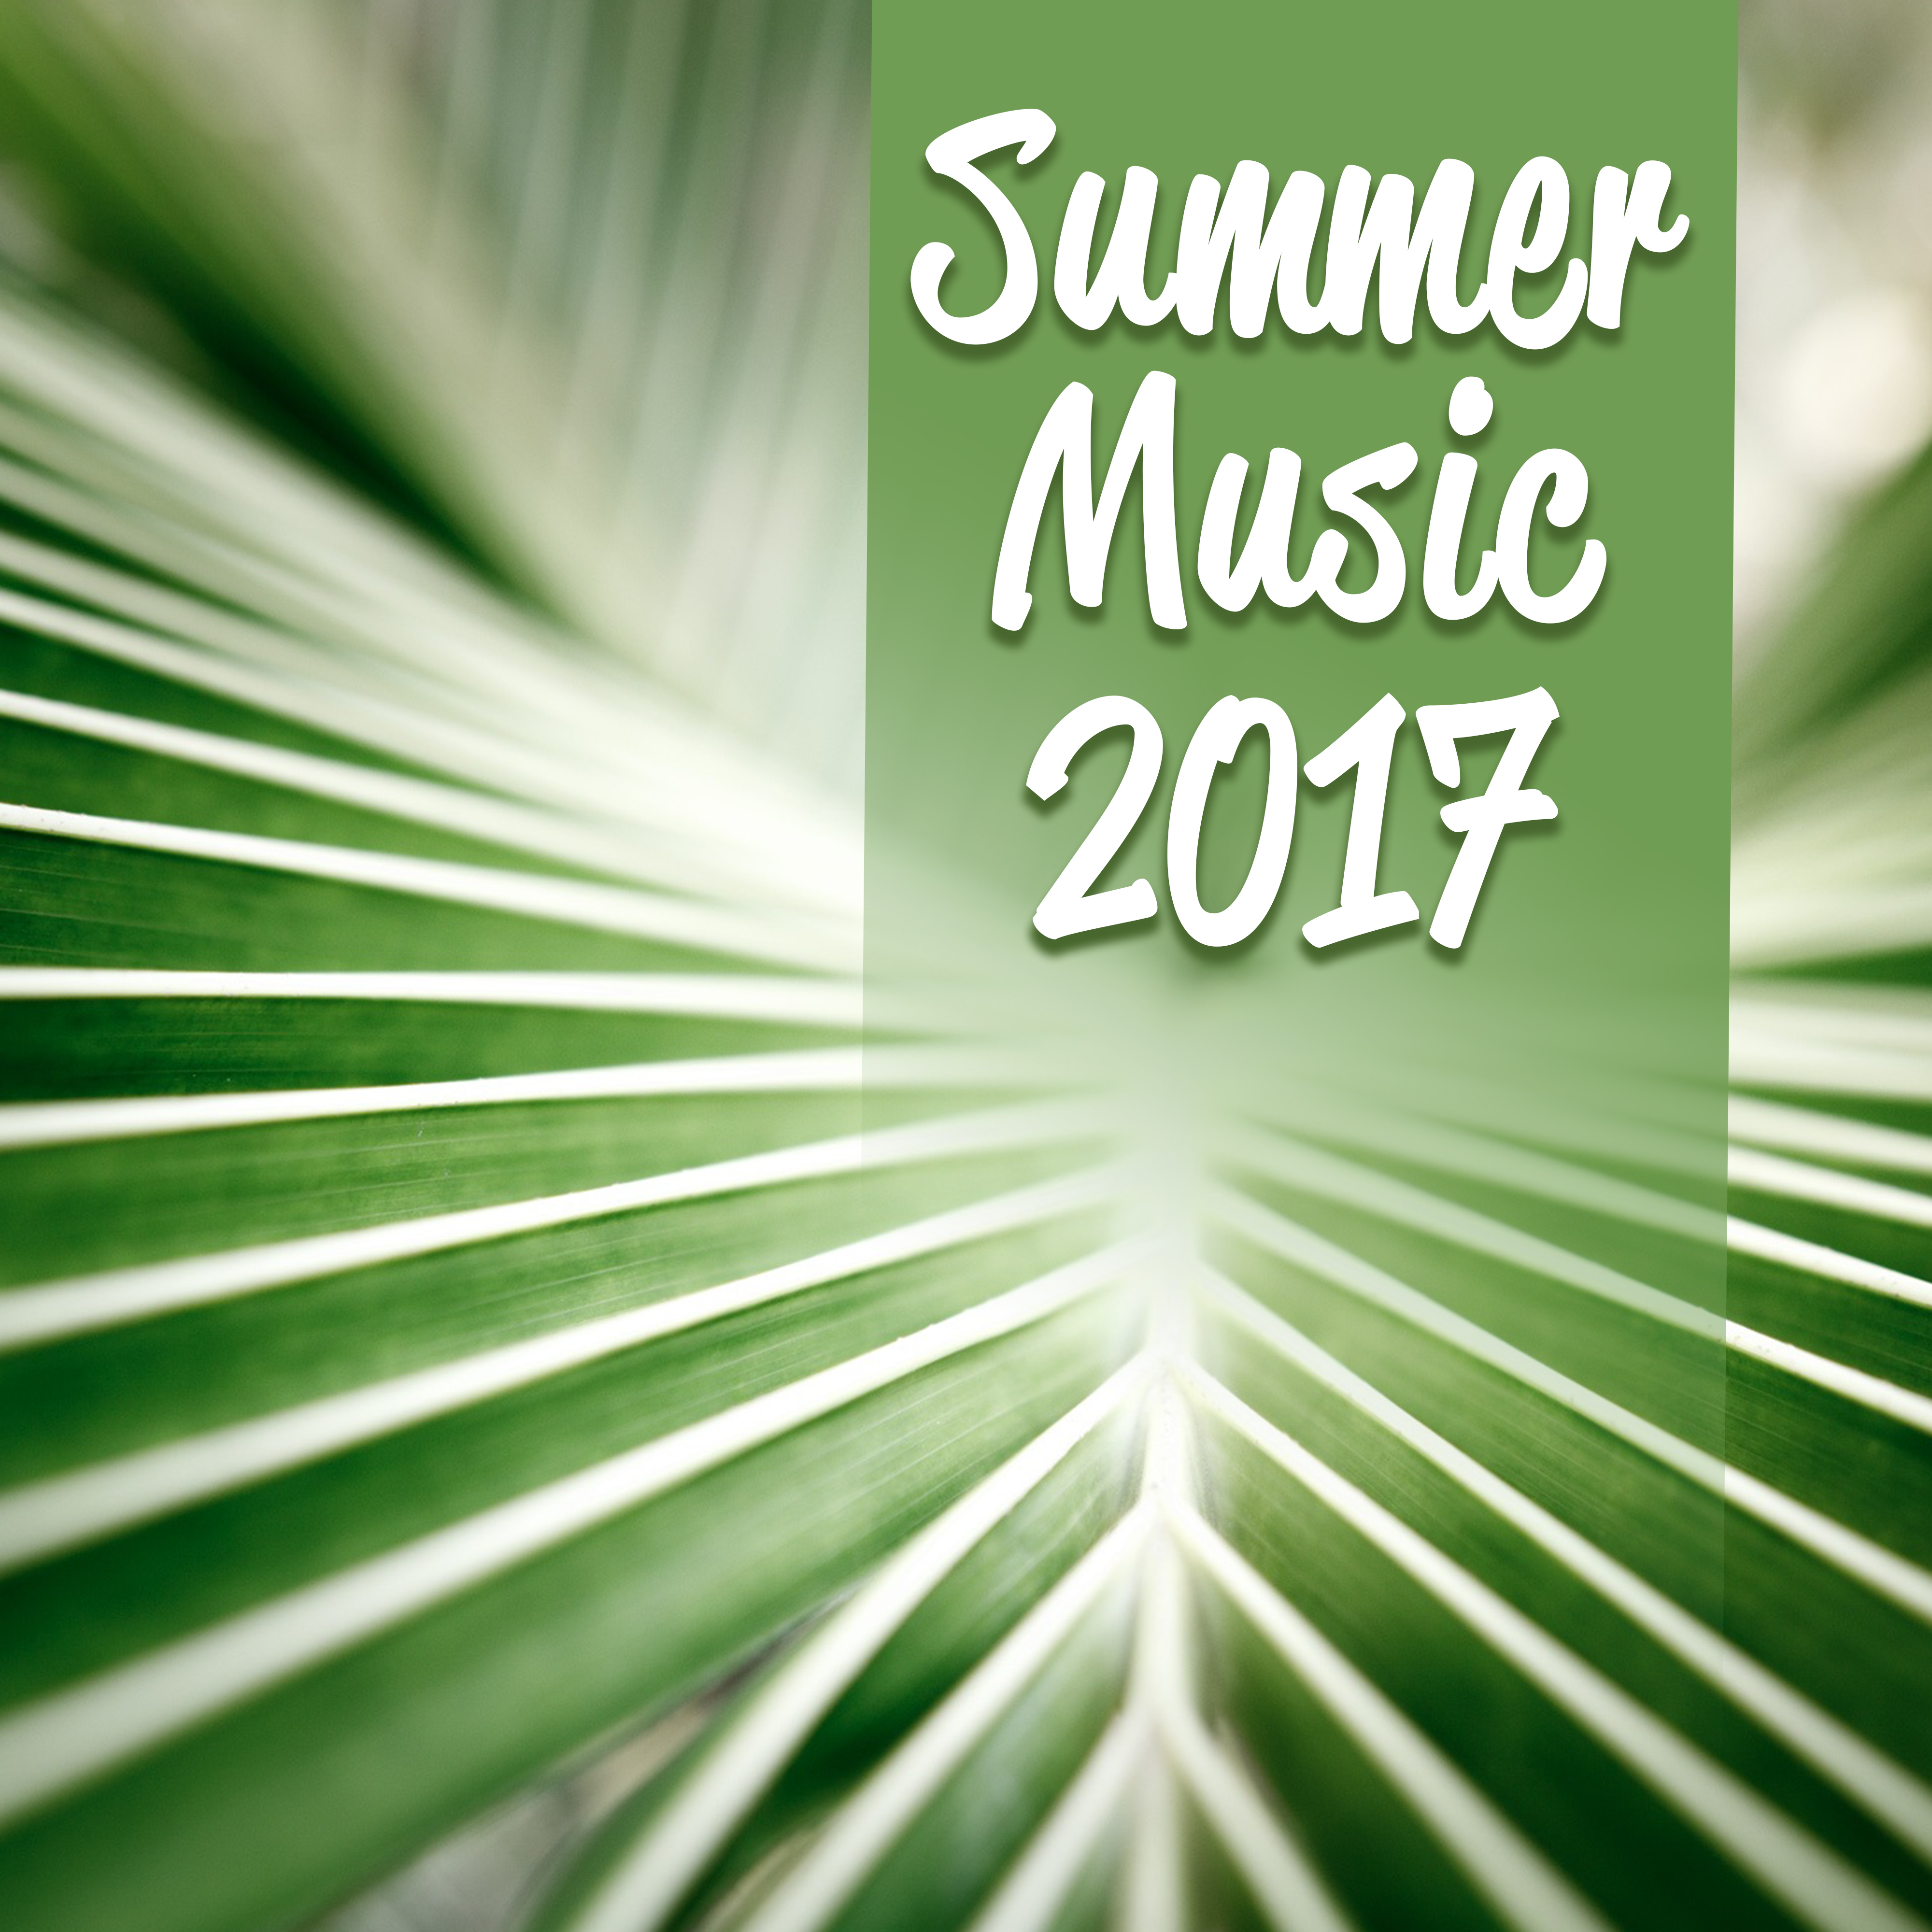 Summer Music 2017  Dance Party, Drink Bar, Beach Chill, Ibiza Lounge,  Chill, Holiday Songs, Deep Relaxation, Party Time